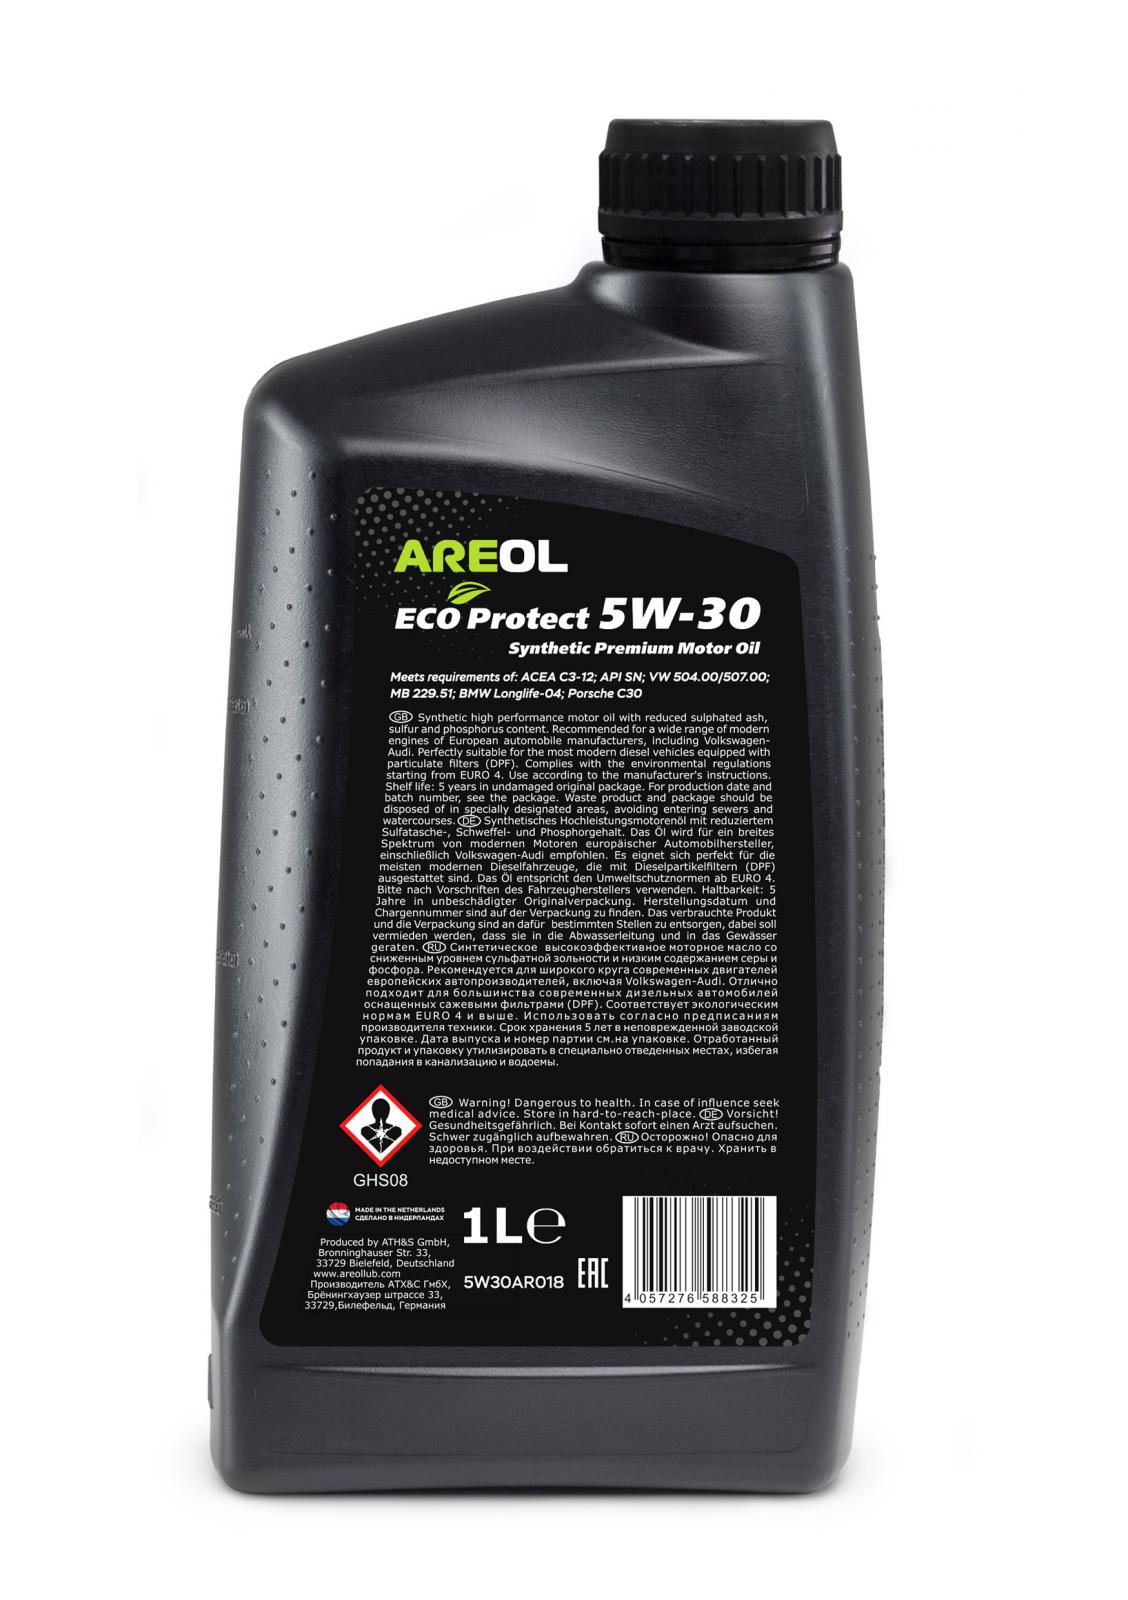 Масло ареол 5w40. Areol Max protect ll 5w-30. Areol 5w30ar019. Areol Max protect ll 5w-30 артикул. Areol 5w30ar008.